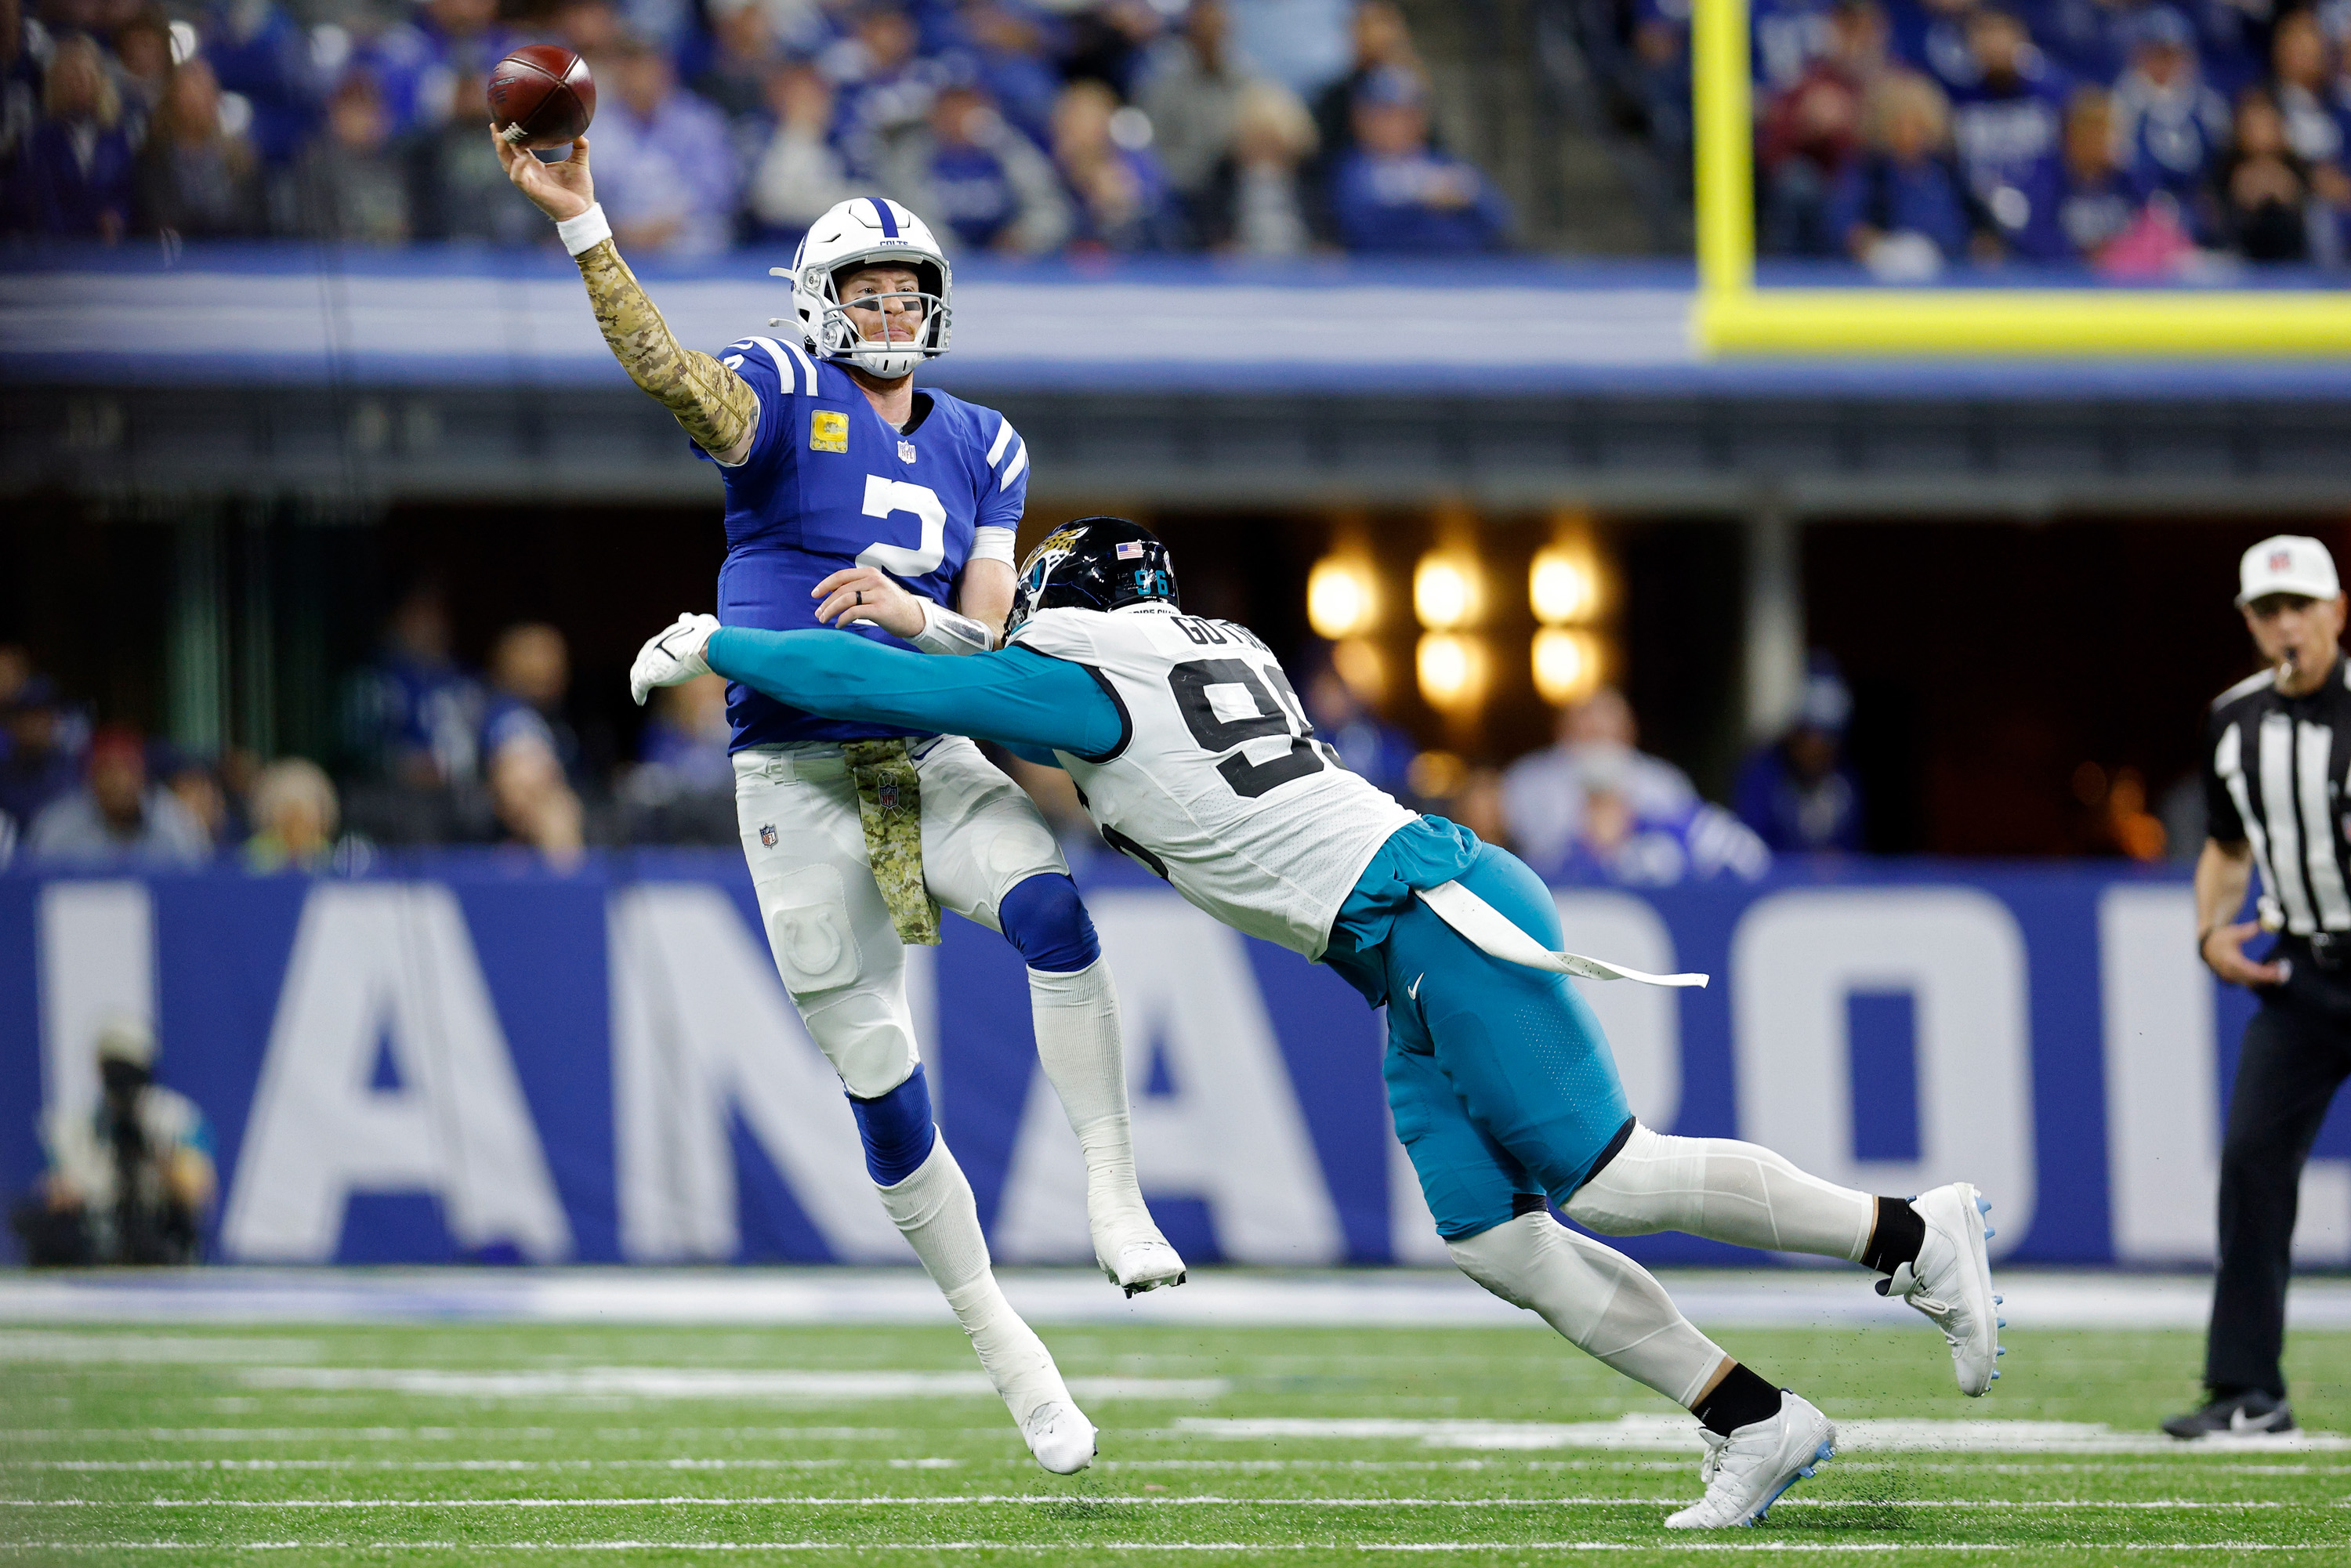 Colts vs Jaguars Point Spread, Over/Under, Moneyline and Betting Trends for NFL Week 18 Game